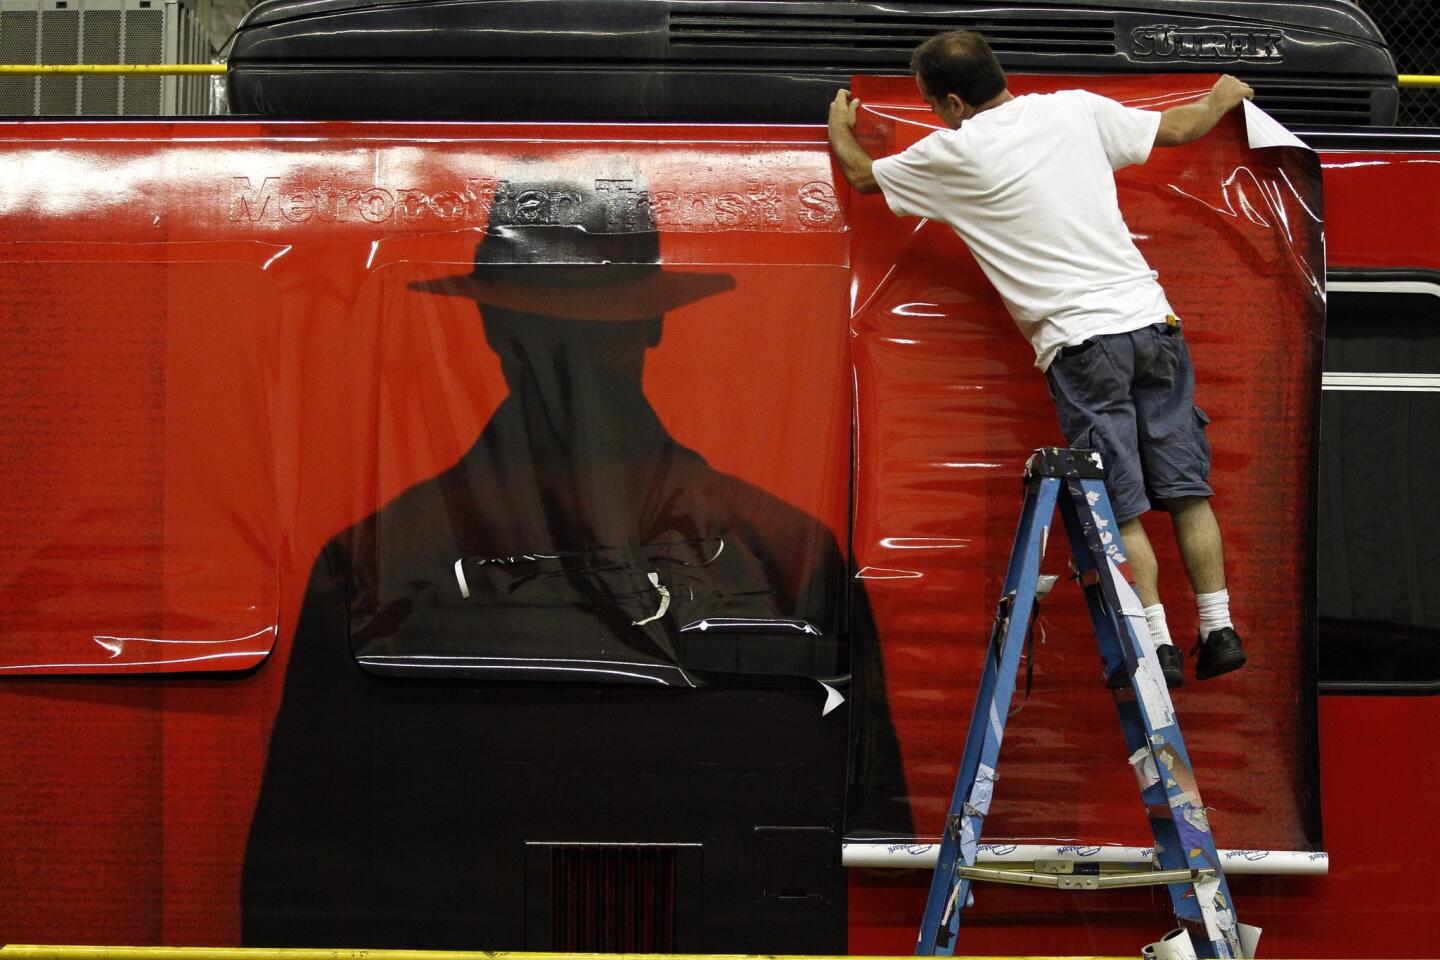 Farzad Parvizi, of Pixel imaging Media, puts on self adhesive transit vinyl as he wraps a trolley car with an advertising wrap for "The Exorcist" television show.